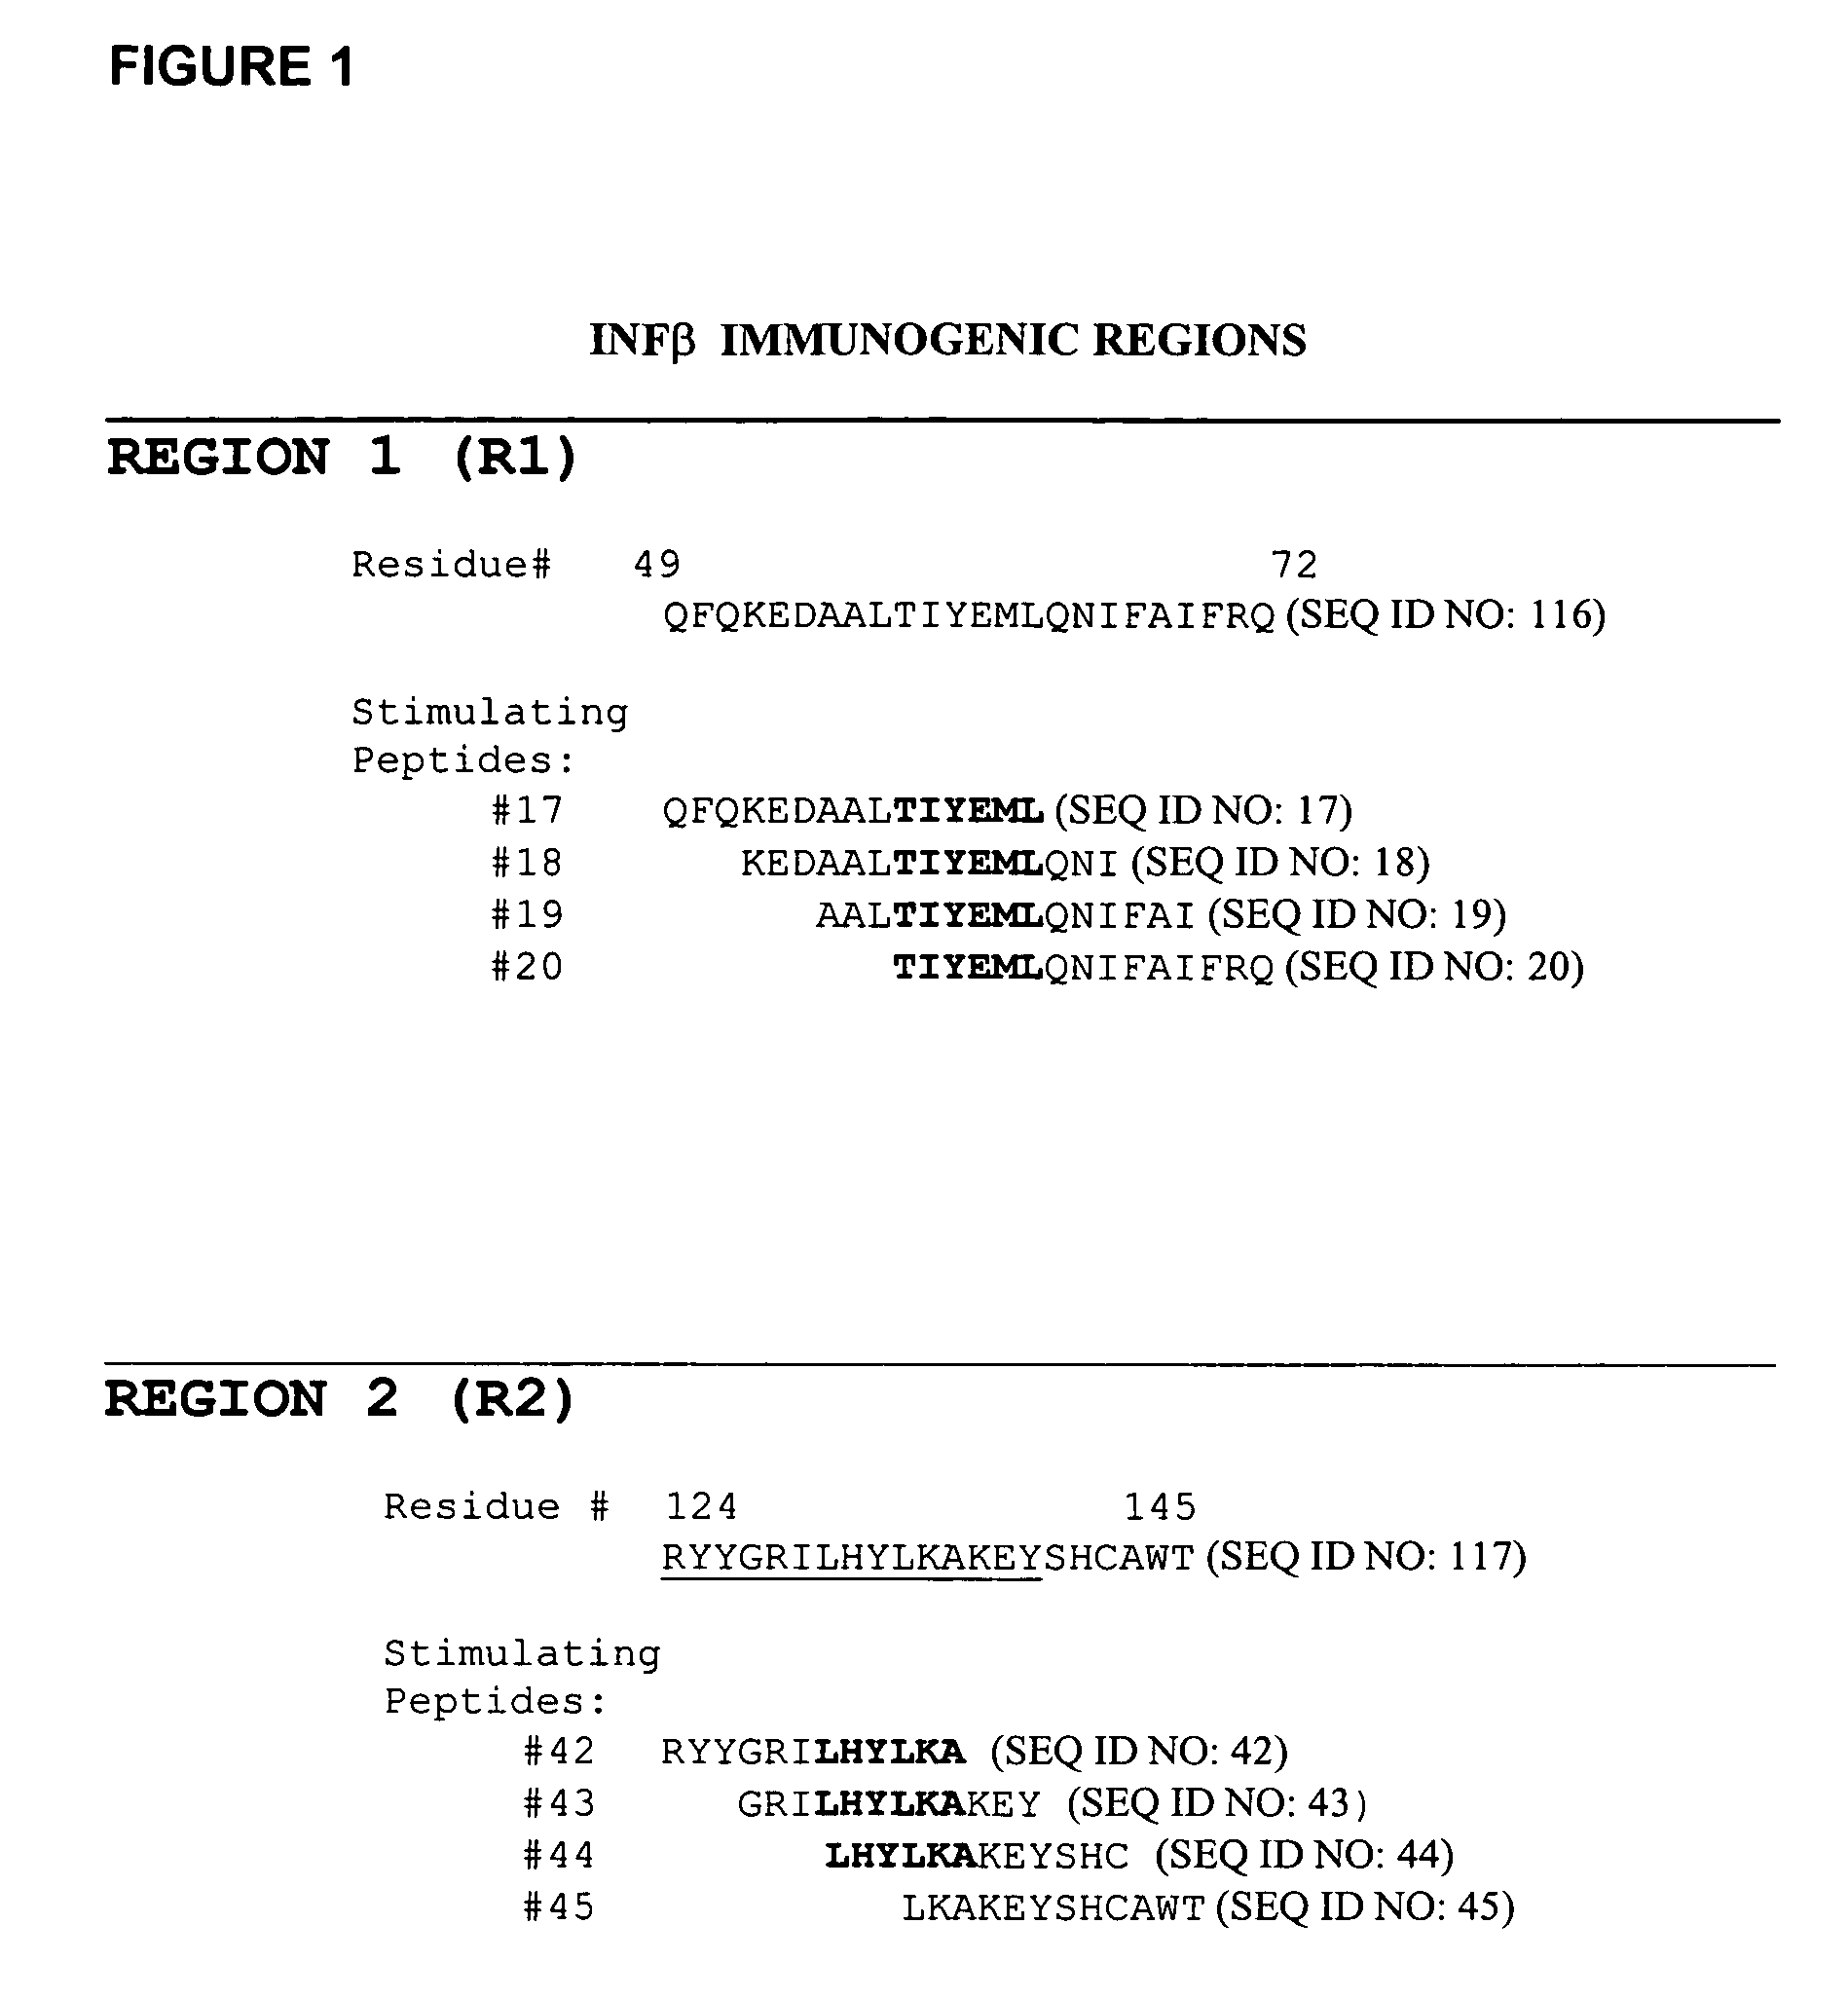 Method for mapping and eliminating T cell epitopes